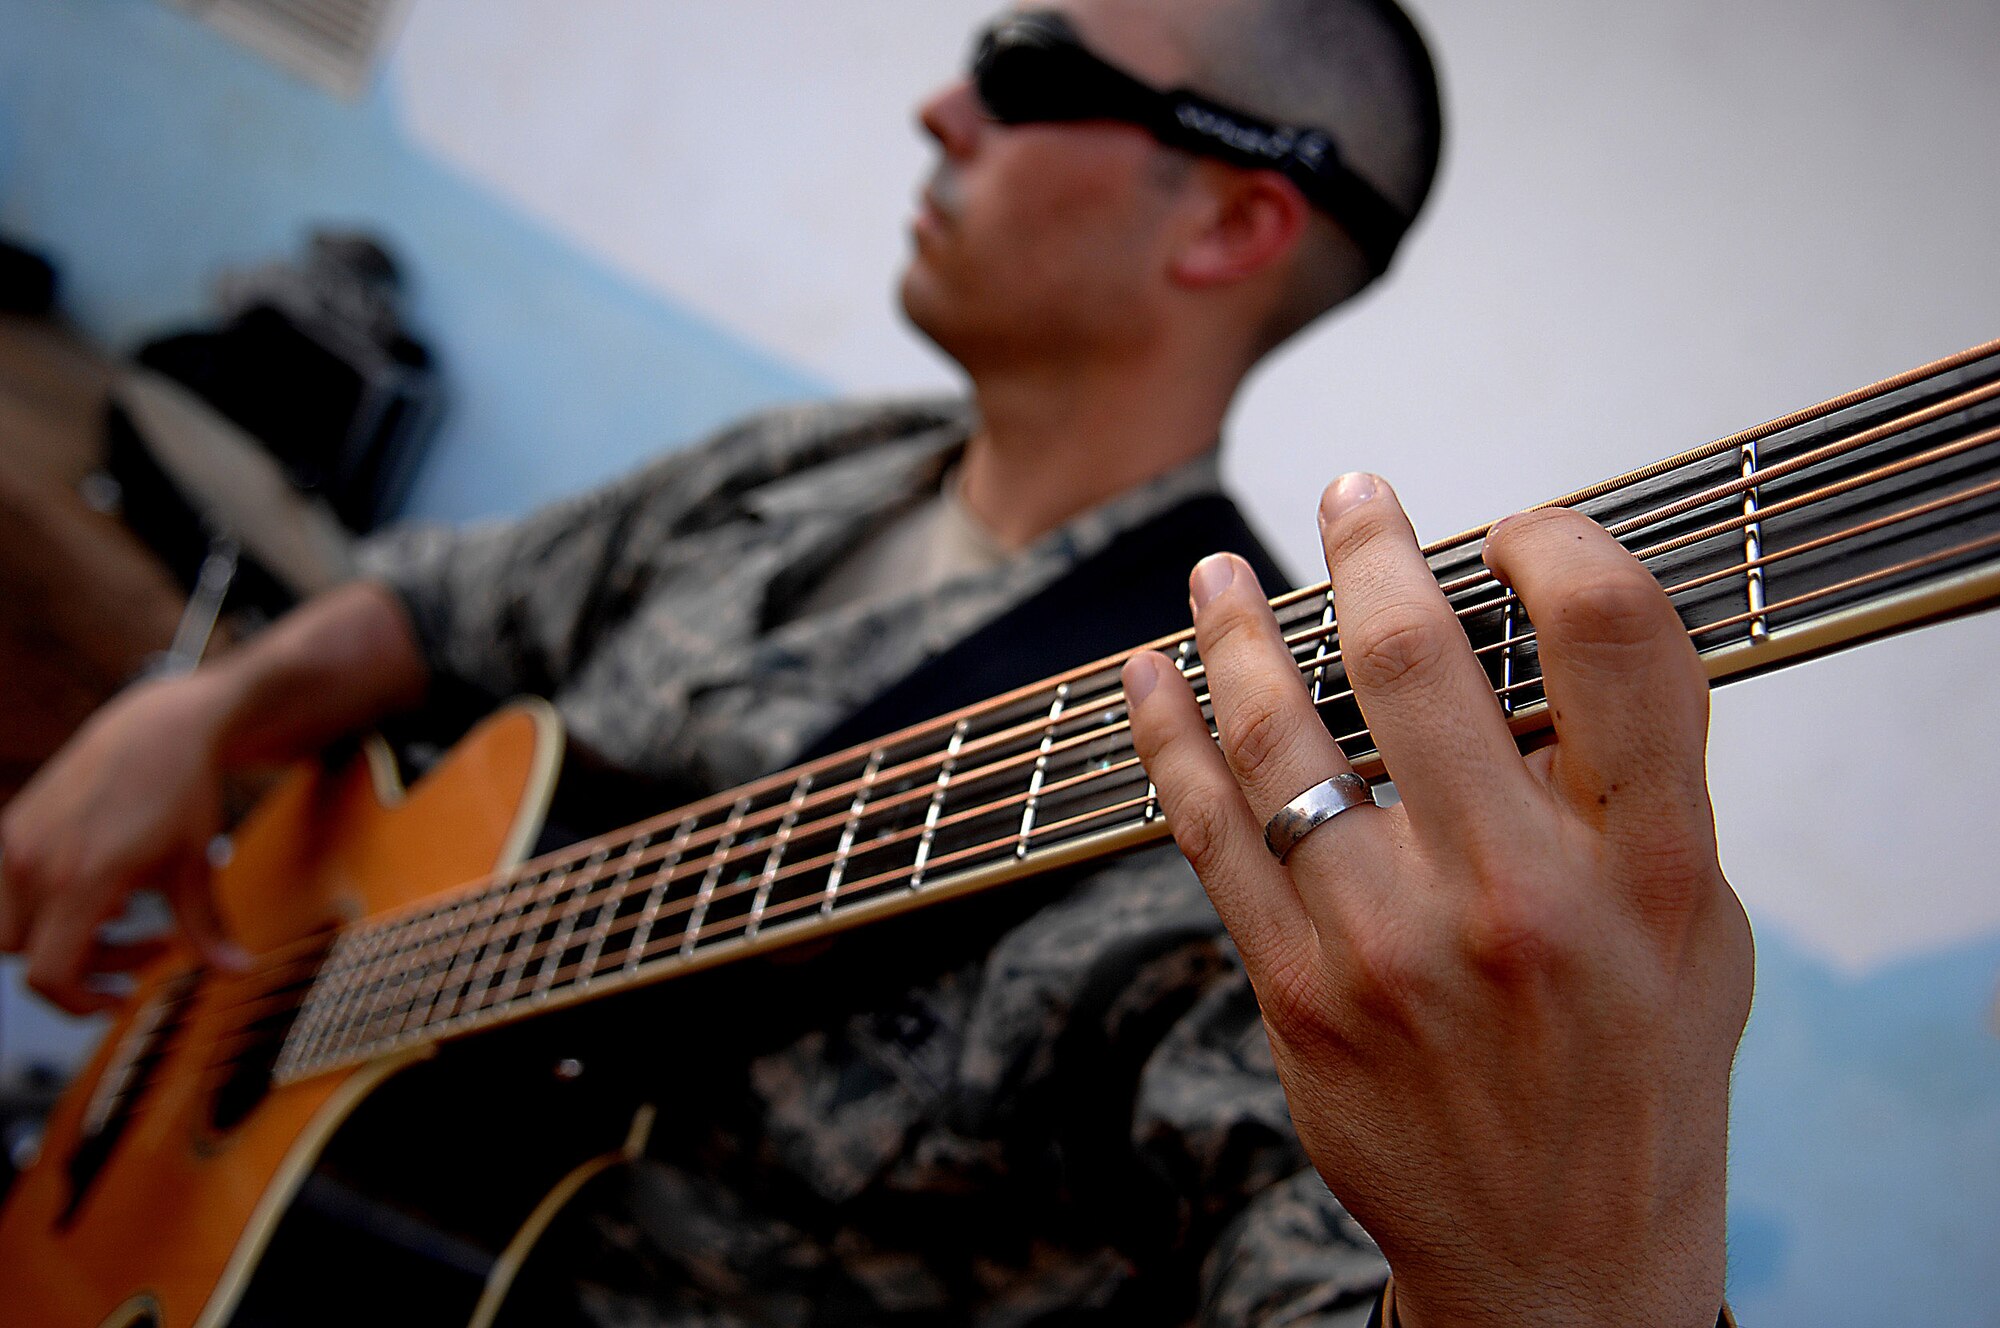 Senior Airman John D. Beasley performs for villagers May 22 in Negad, Djibouti.  The band is deployed to support Combined Joint Task Force - Horn of Africa out of Camp Lemonier, Djibouti.  Airman Beasley is the bass player with the Air Force Central Command band, Falcon.  (U.S. Air Force photo/Tech. Sgt. Jeremy T. Lock)